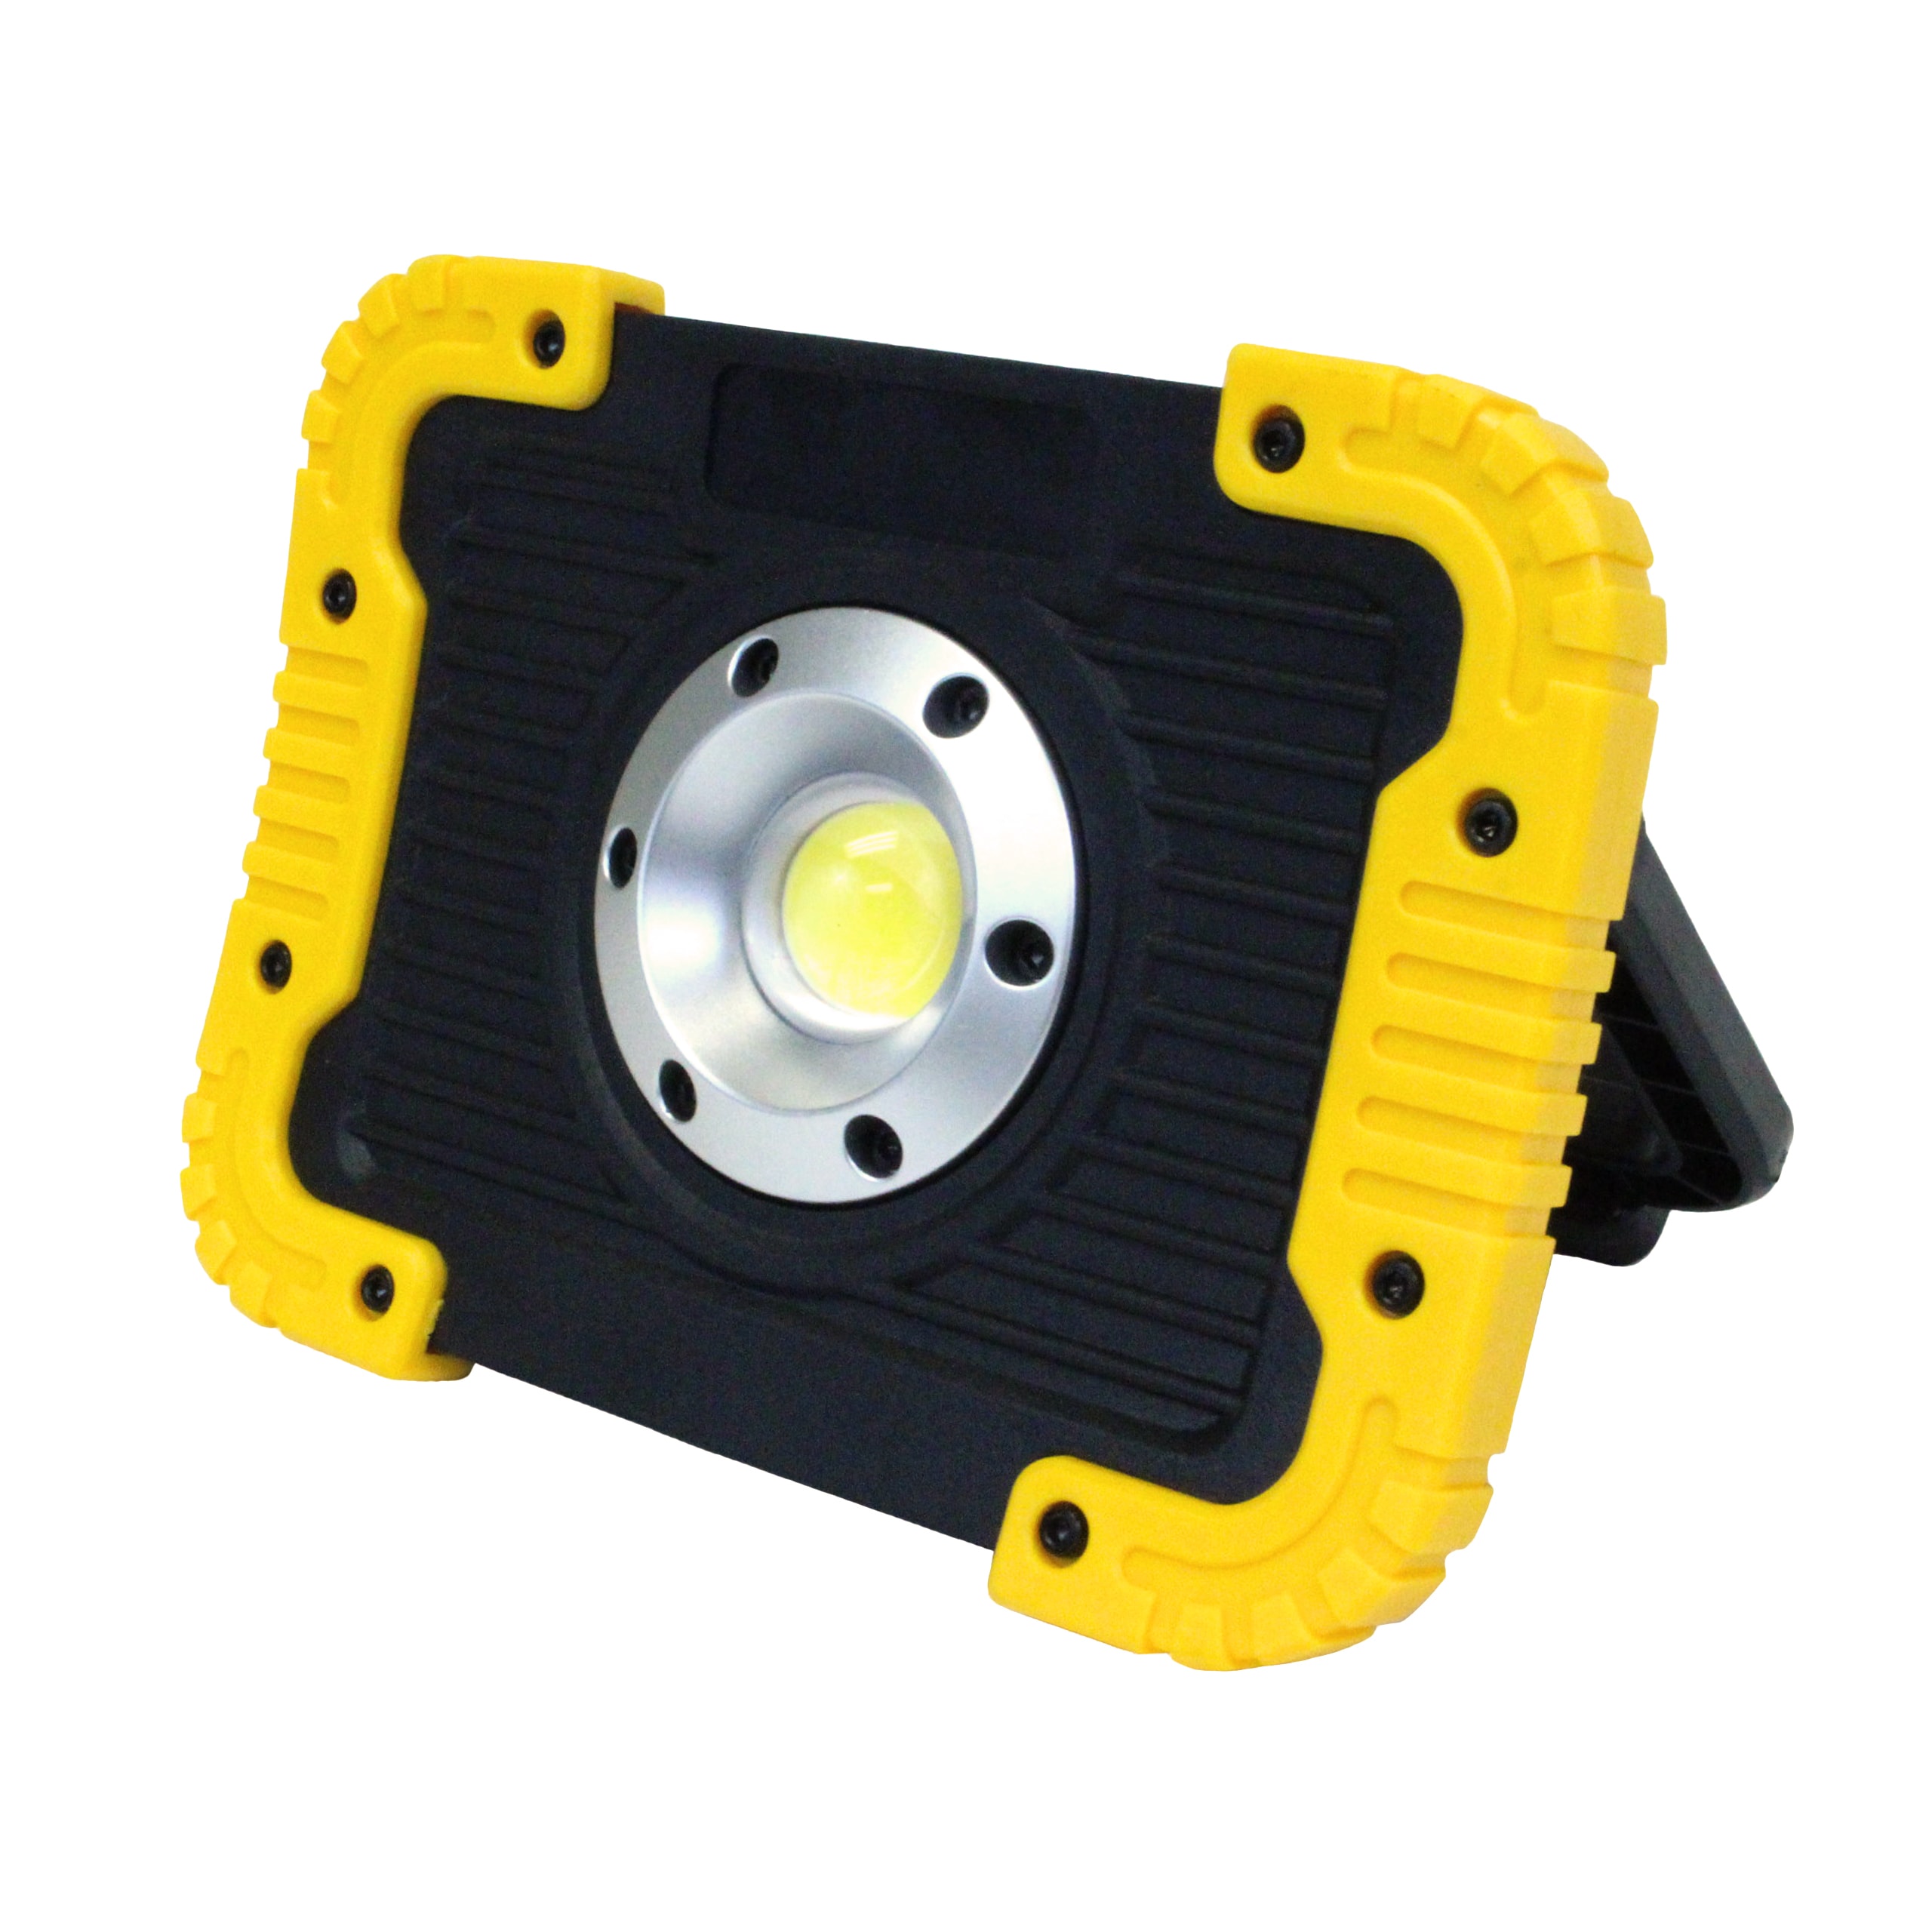 600-Lumen LED Yellow Battery-operated Rechargeable Portable Work Light | - Boxer Tools 80011 (1)